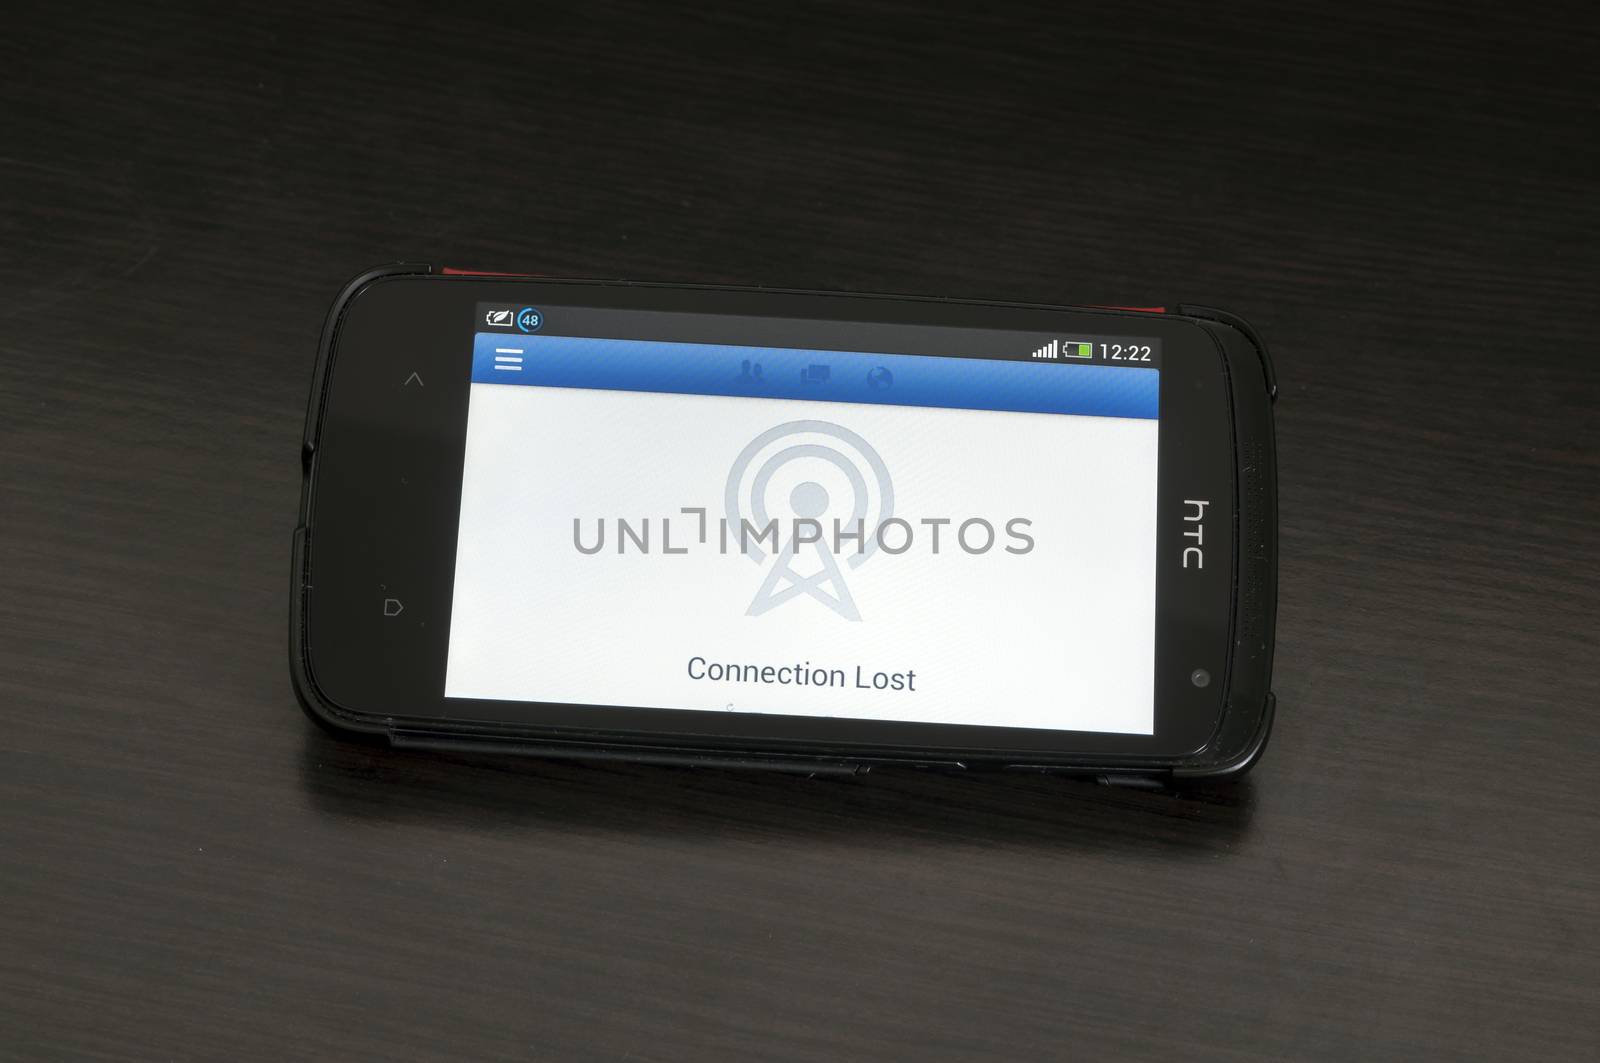 Photo of a HTC Desire device, showing the Connection Lost logo by maxmitzu